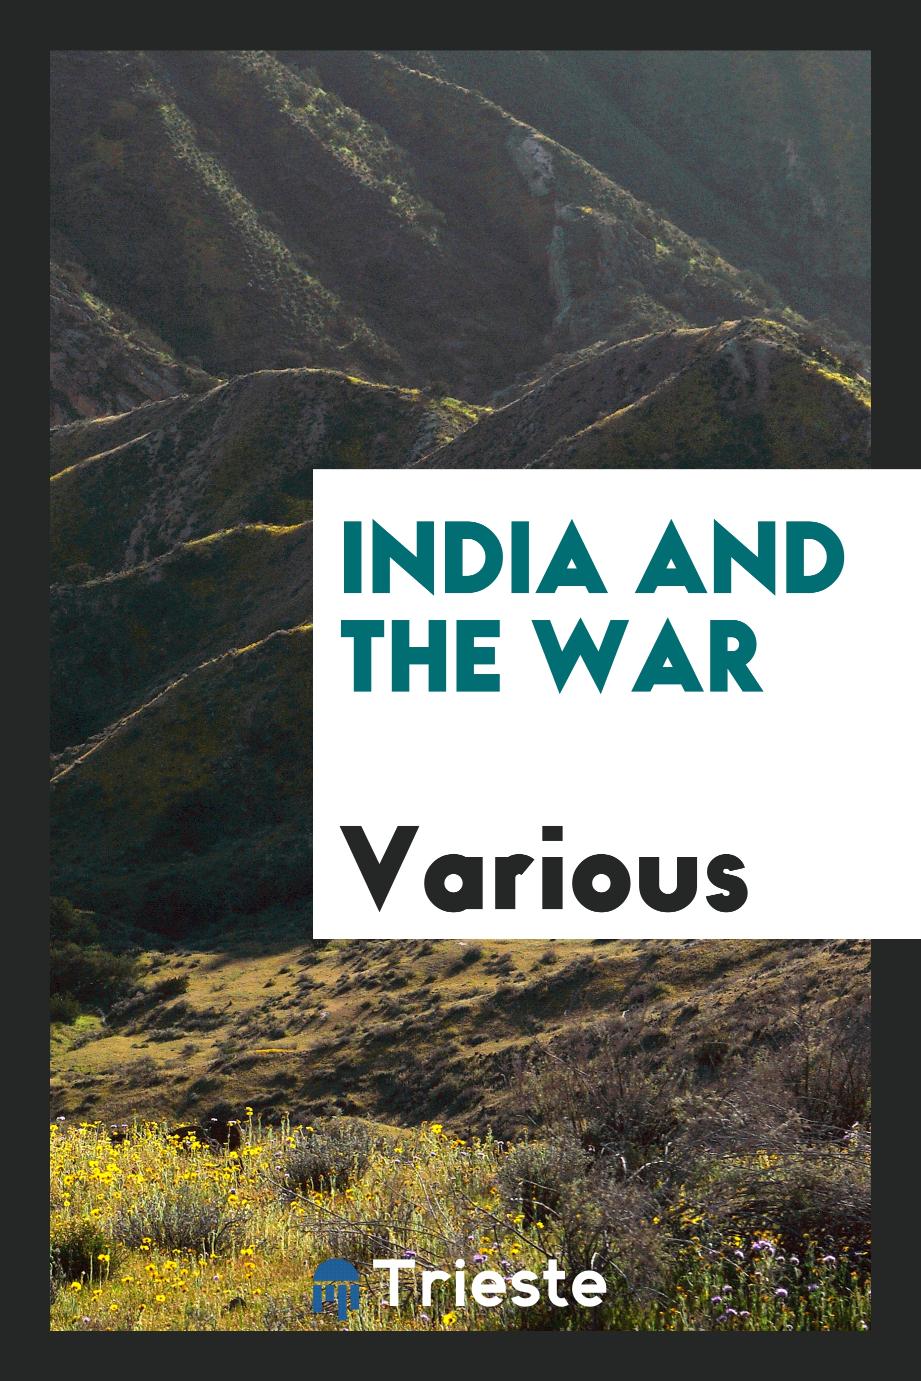 India and the war